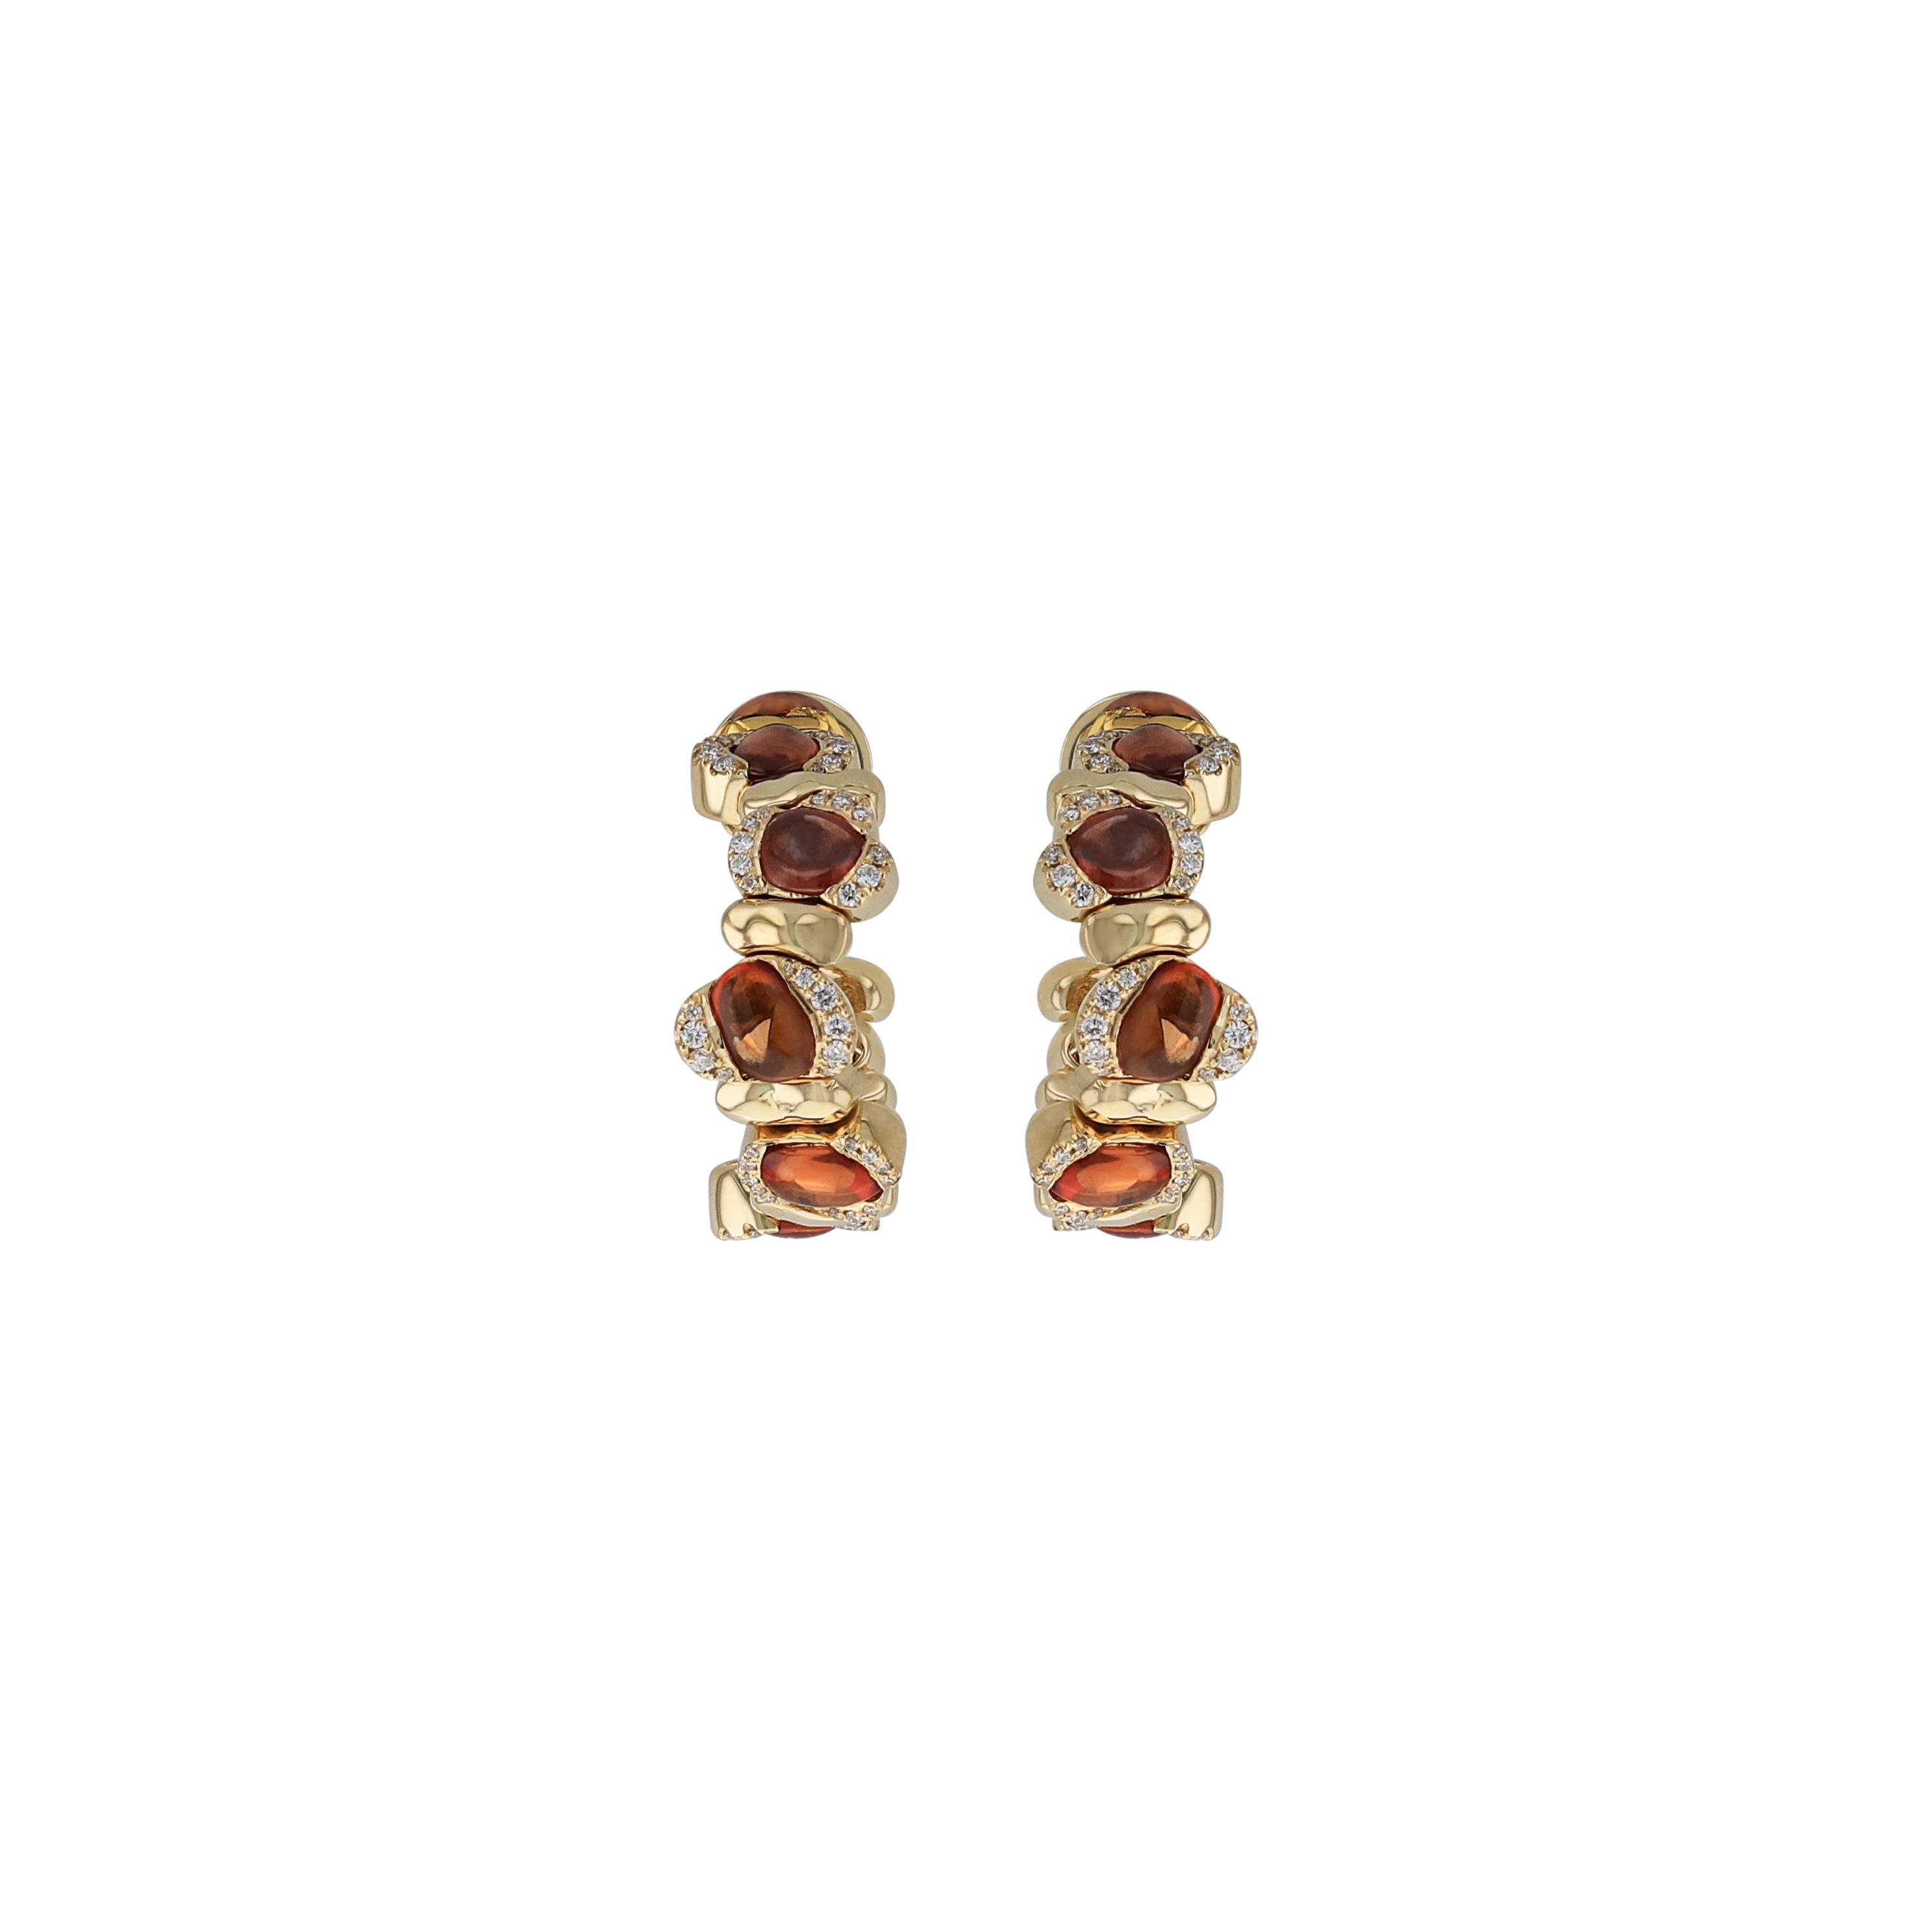 Delicate, swirling earrings in 18 karat yellow gold and orange sapphires that loop elegantly around the ear, Amwaj mini signature earrings showcase the artistry of our designers who position each pave stone by hand. 
18 Karat Yellow Gold
19.86 g
